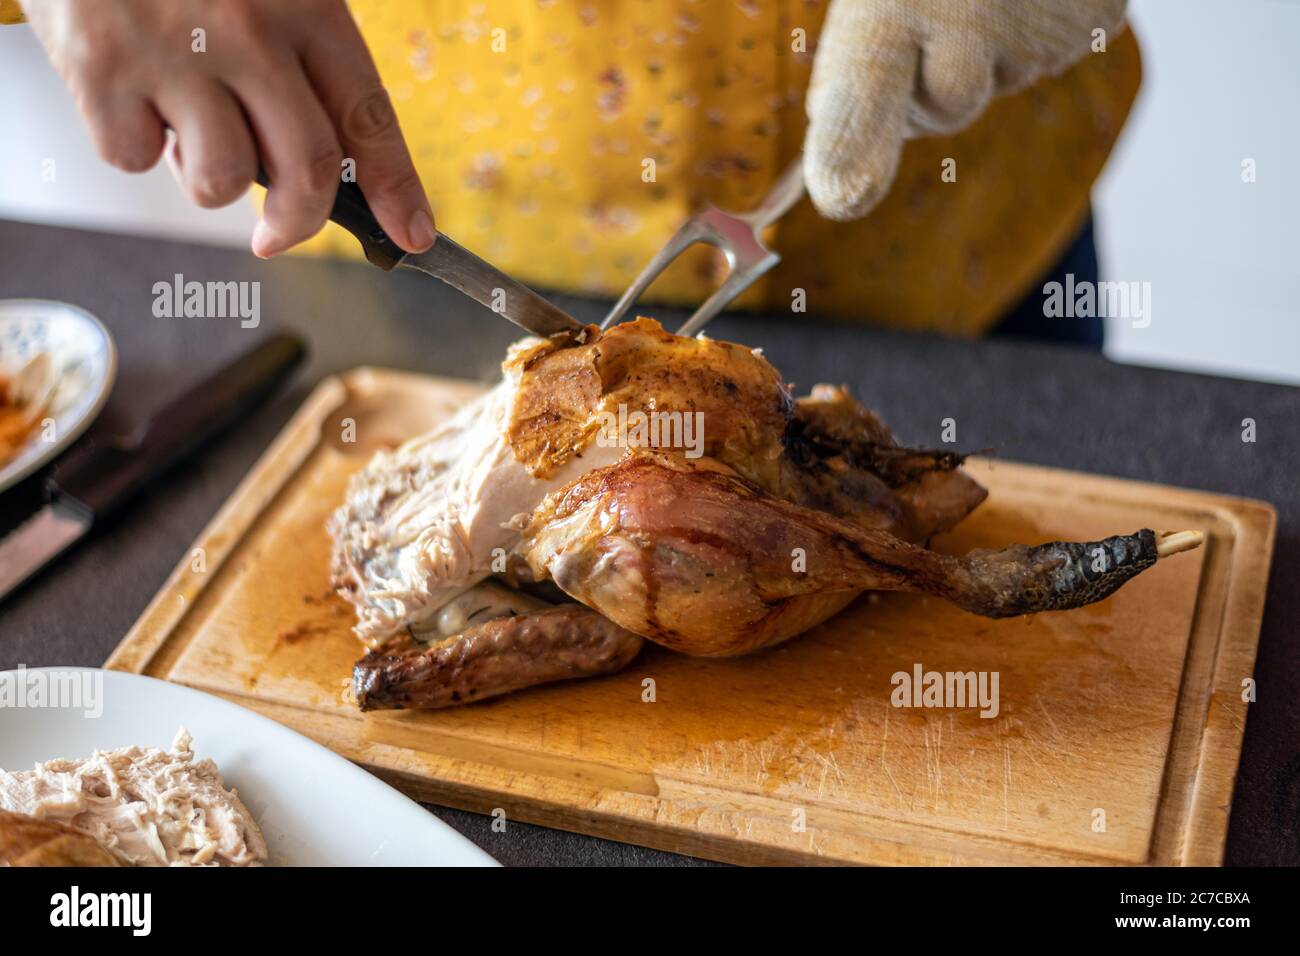 Chef Slicing Roast Beef Using Carving Knife Stock Photo - Download